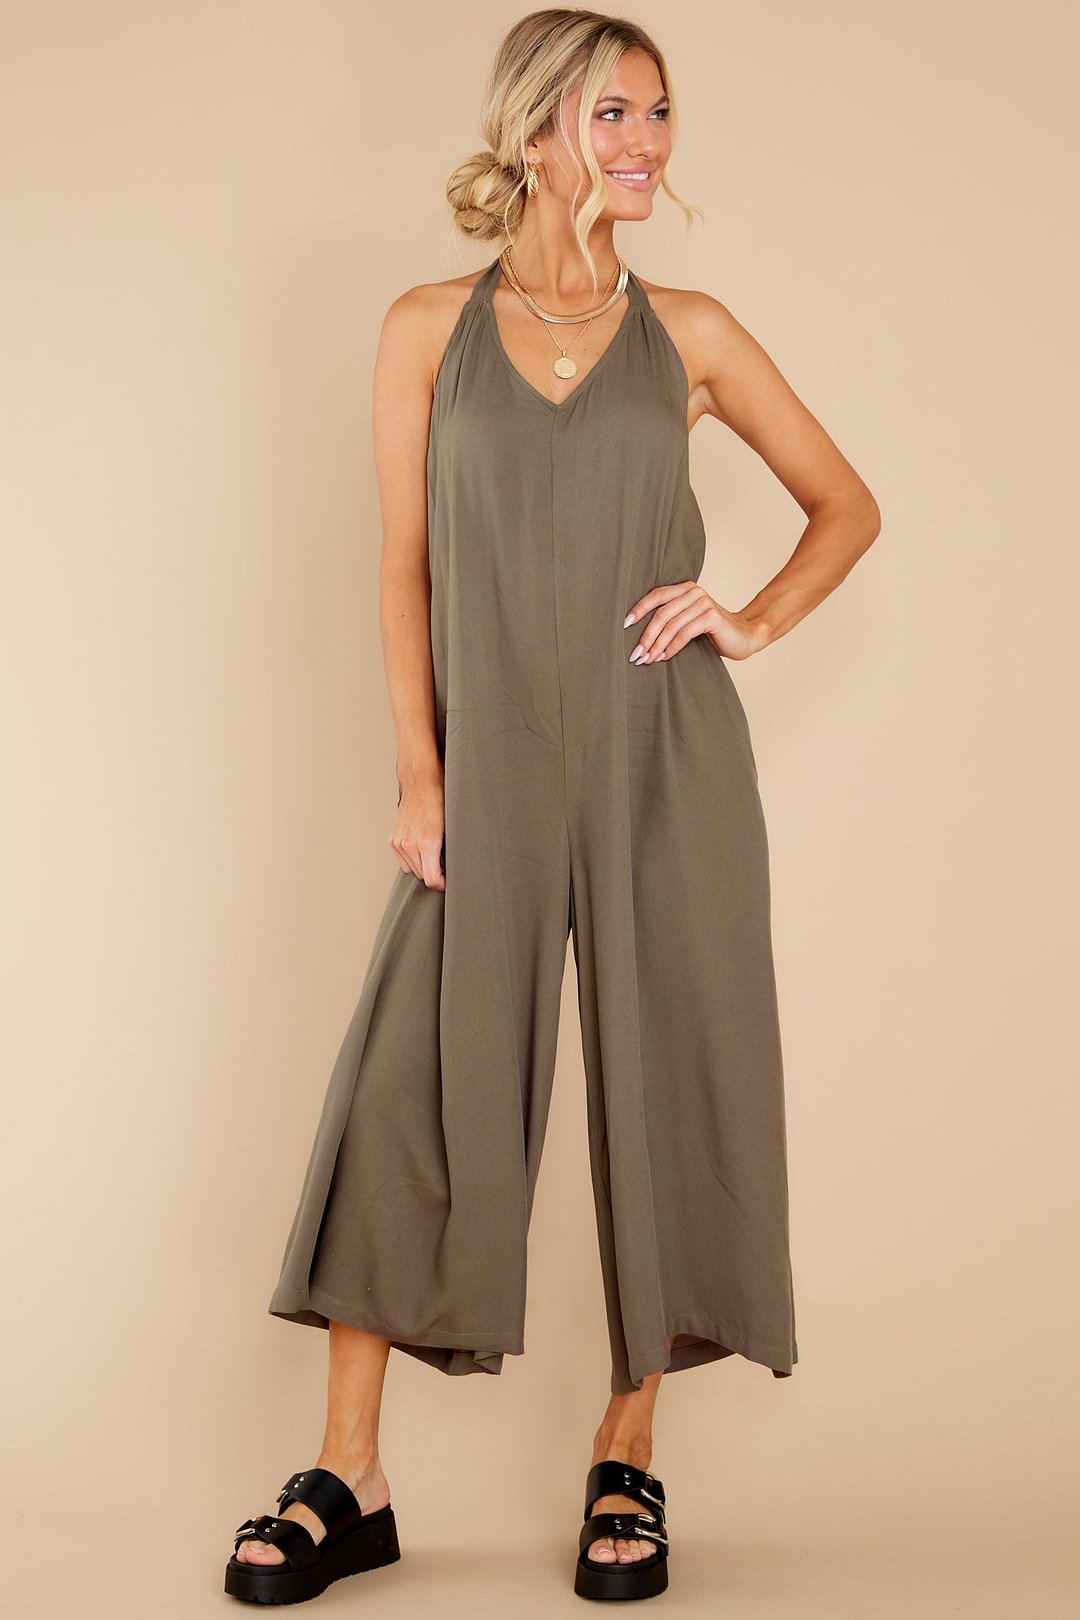 Here Forever Vintage Army Green Jumpsuit